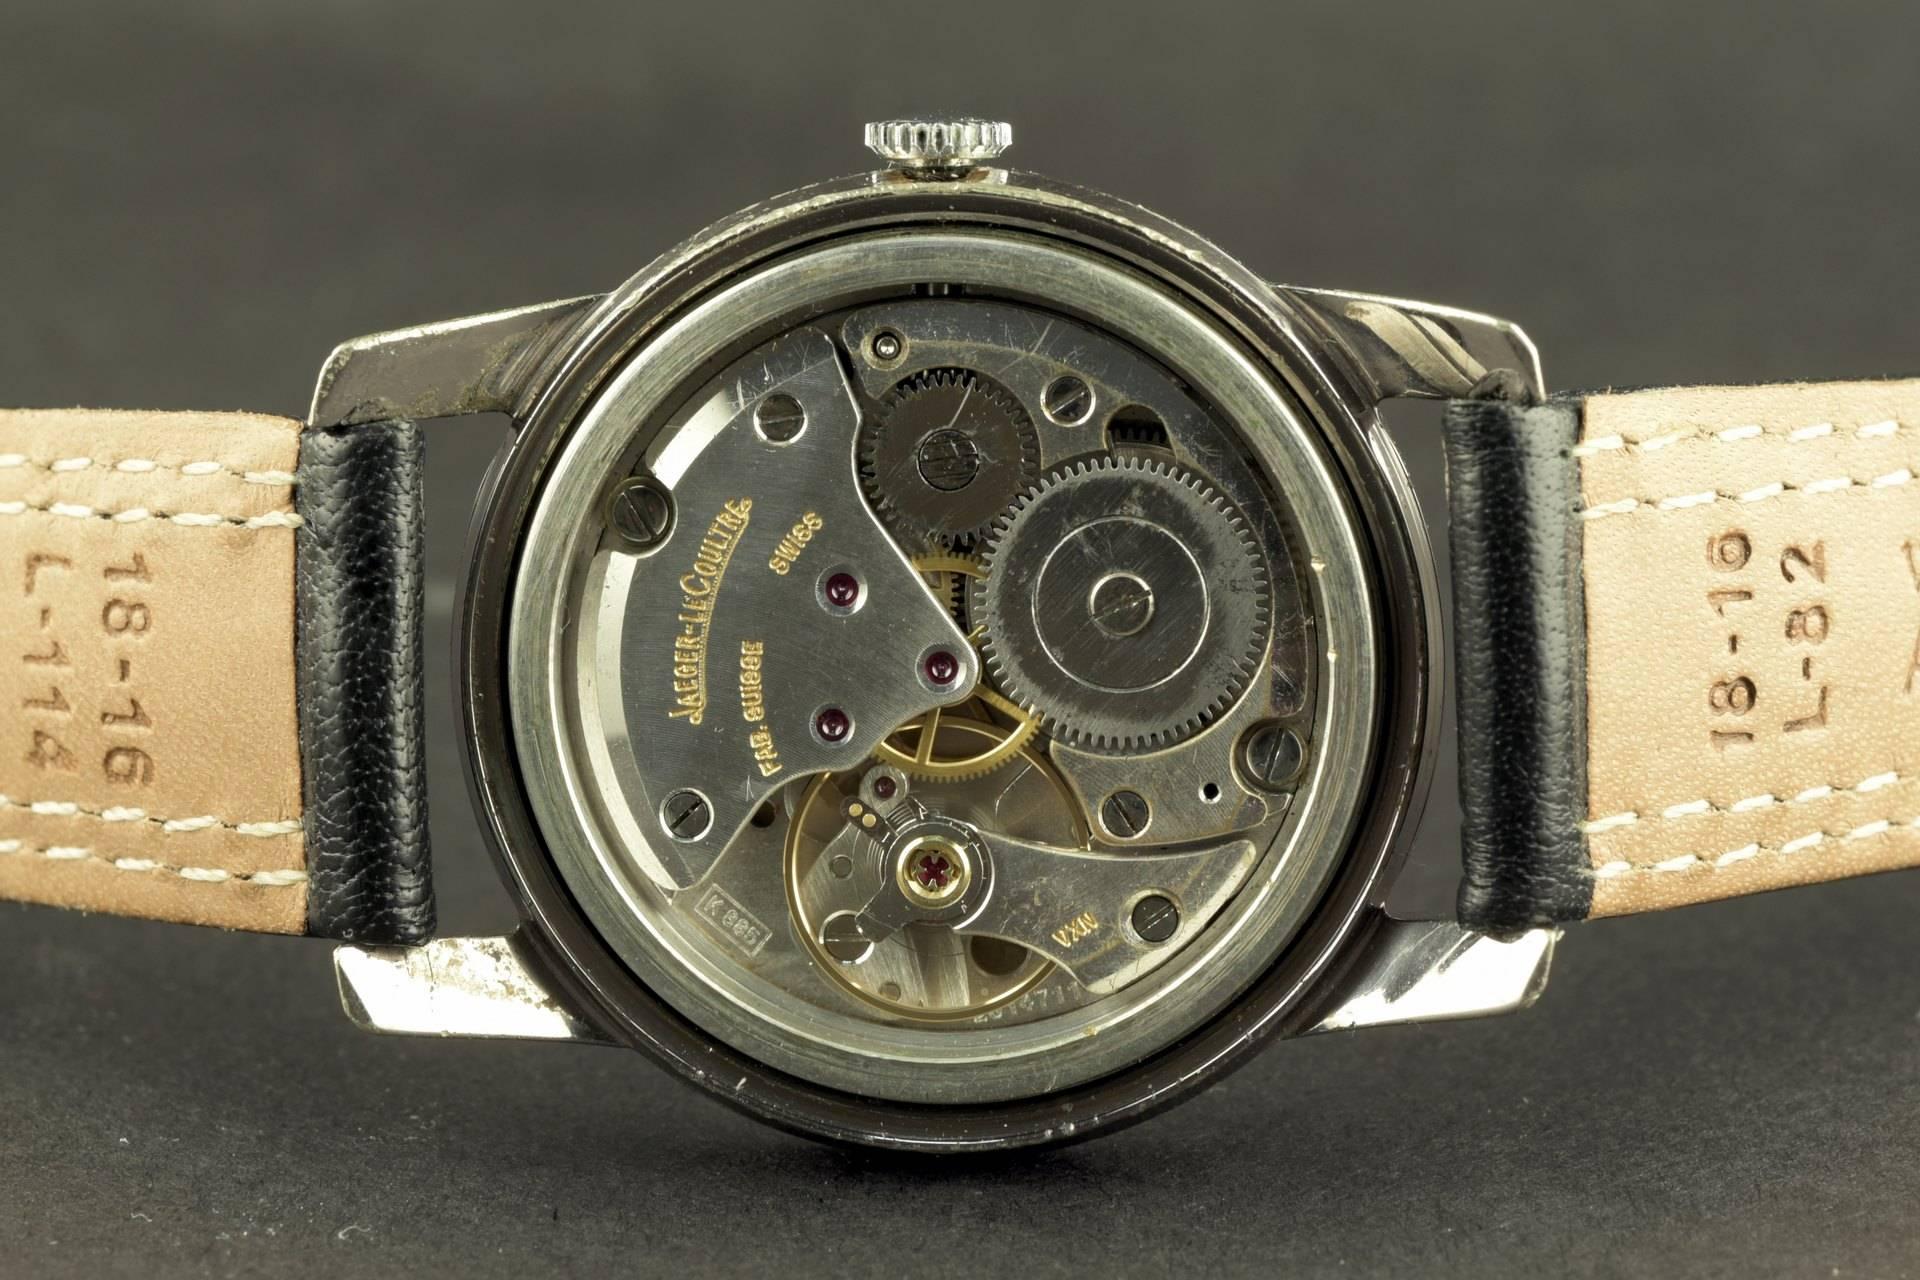 This wrist watch model by Jaeger Le Coultre is perfectly readable by the high contrast black dial and the illuminated luminous numerals. Jaeger's manufactory handwind movement here freshly overhauled keeps time very well. The watch does not have any